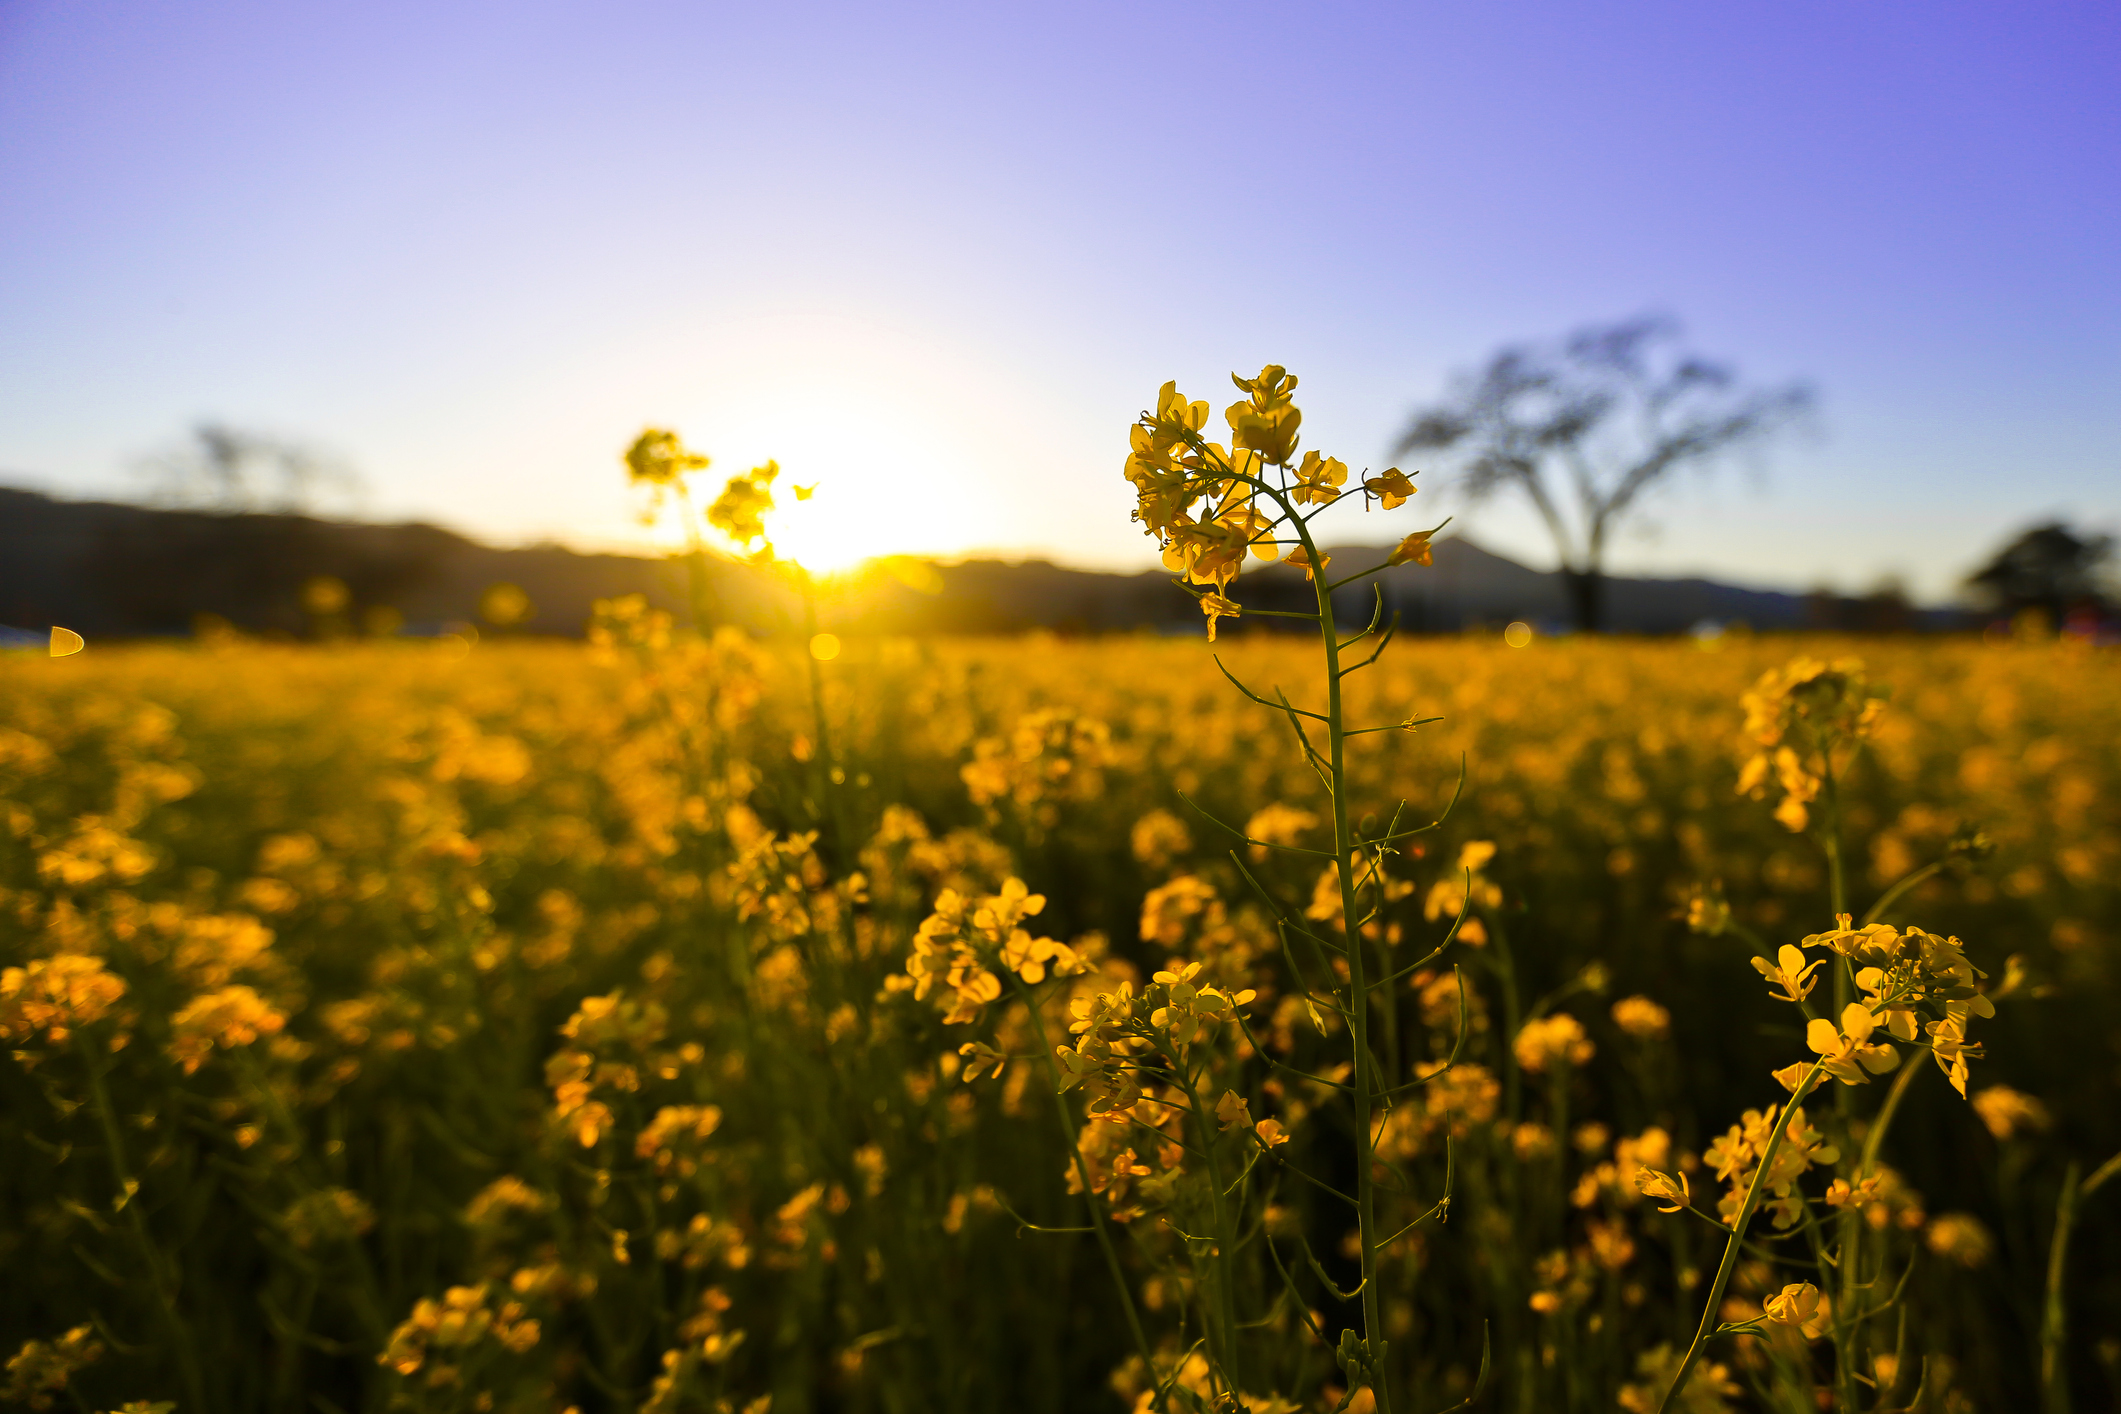 image shows a field of mustard flowers with the sun shining in the background